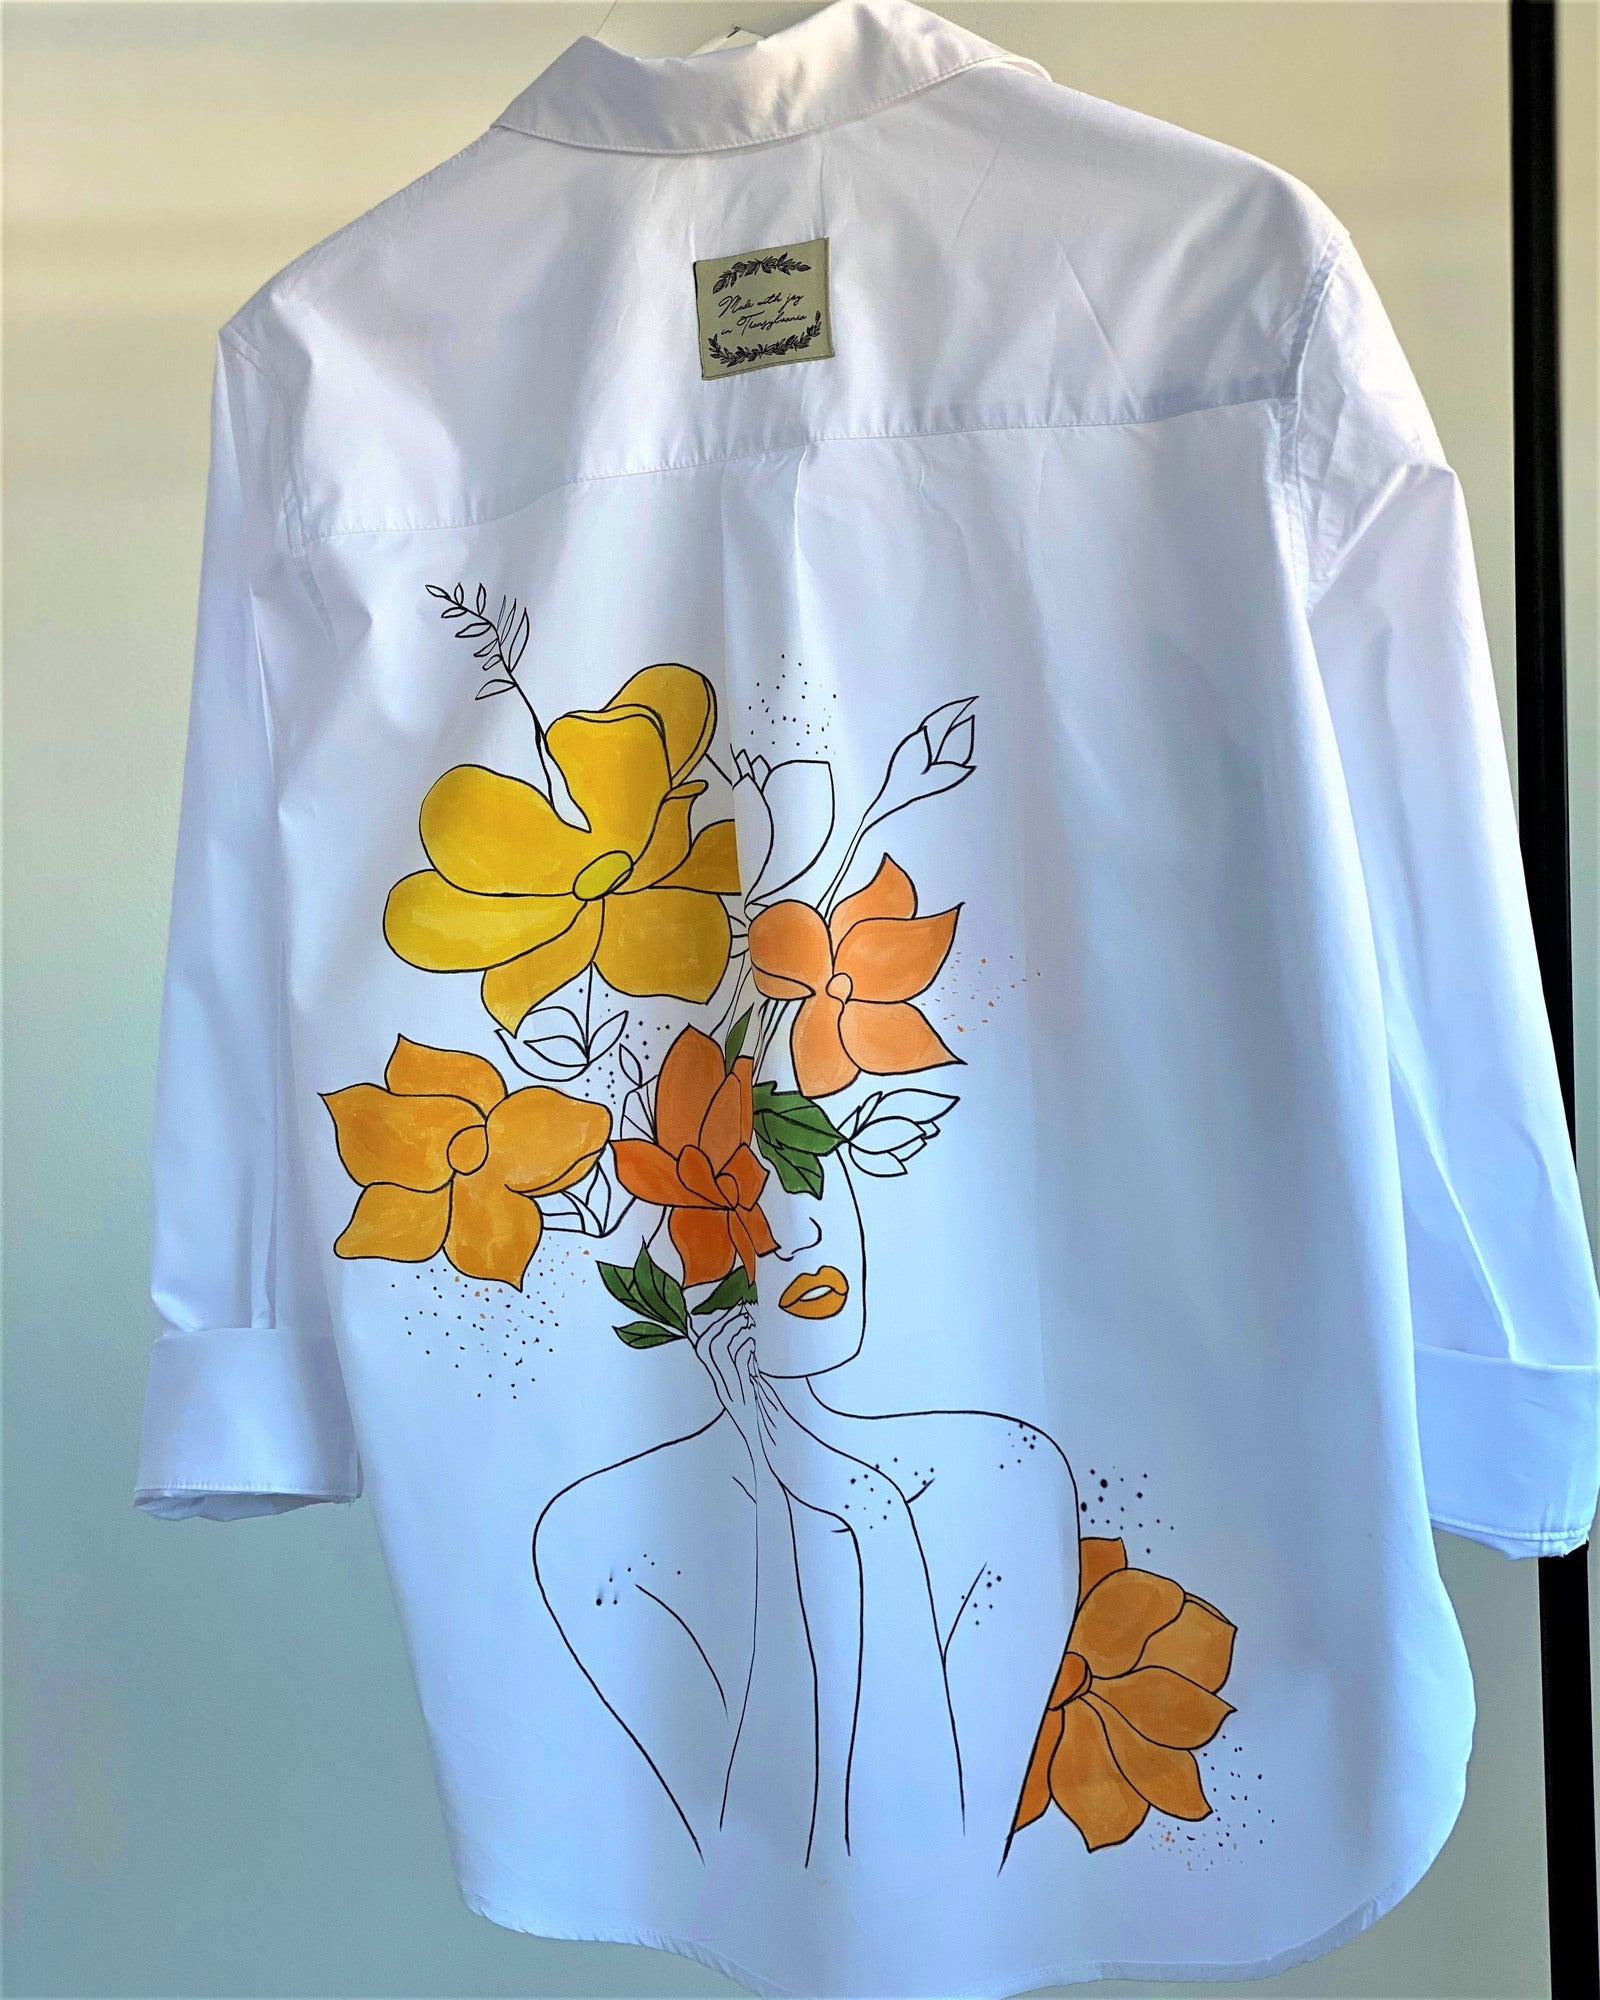 "Fruitful thoughts" hand painted shirt